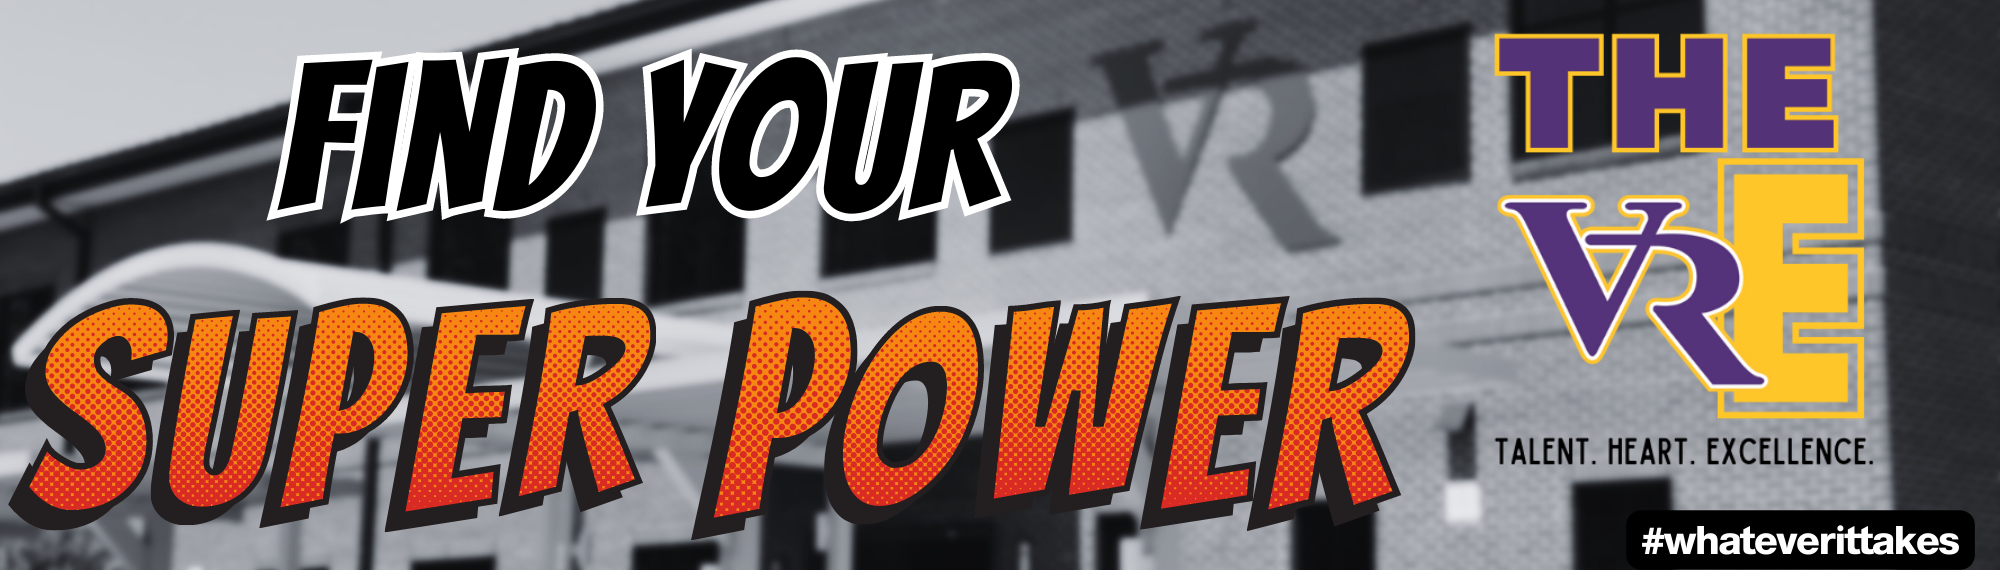 Find your super power at THE VRE